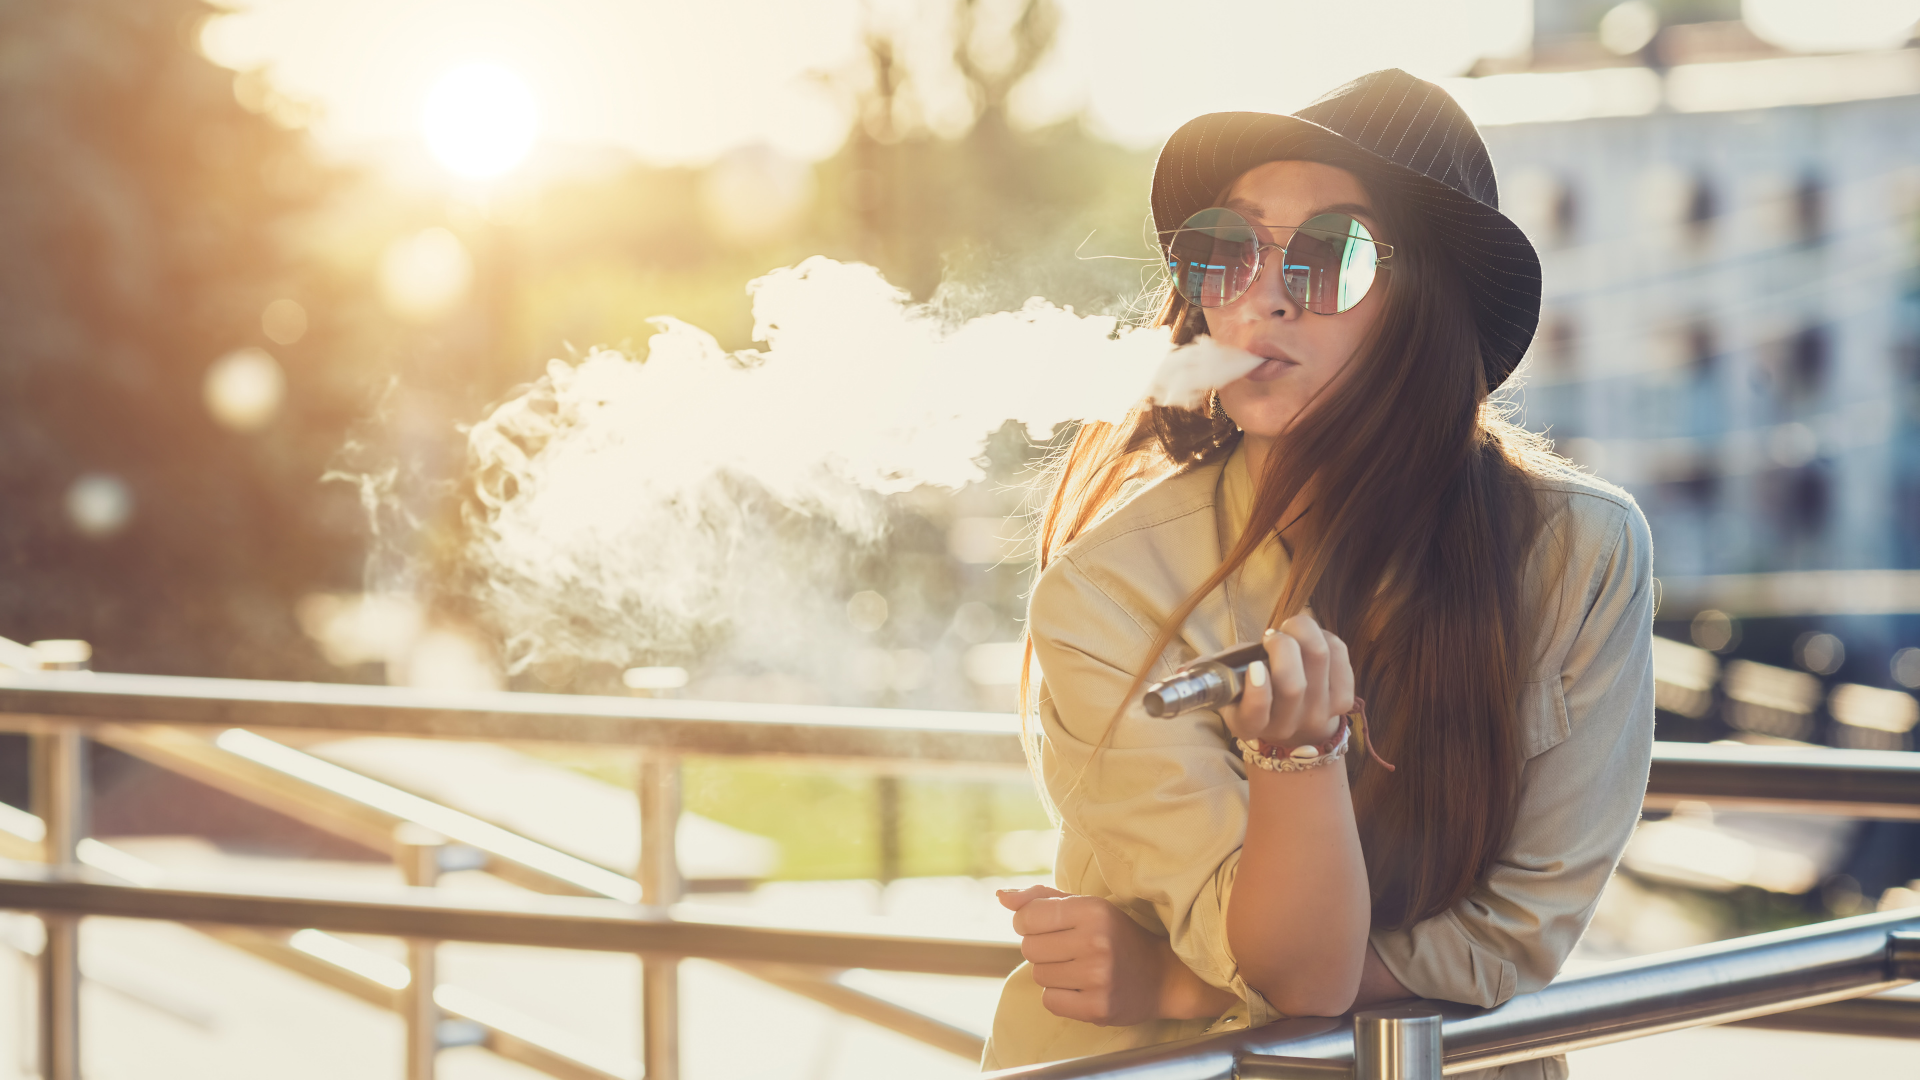 Common Vaping Issues and How to Solve Them